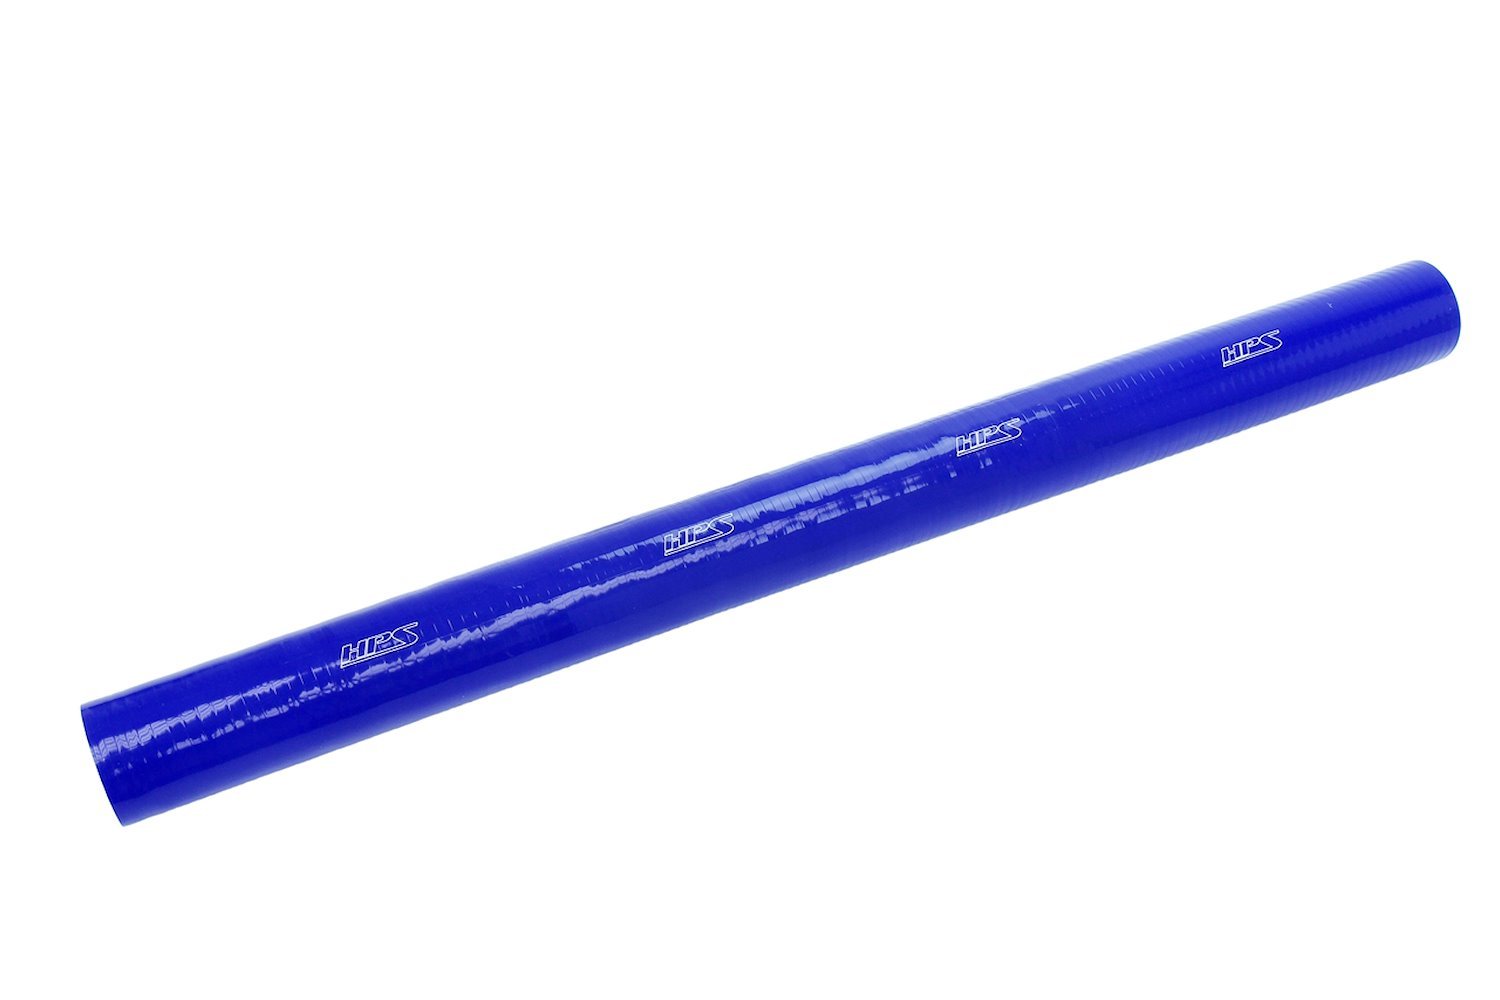 HTST-3F-750-BLUE Silicone Coolant Tube, High-Temp 6-Ply Reinforced, 7-1/2 in. ID, 3 ft. Long, Blue